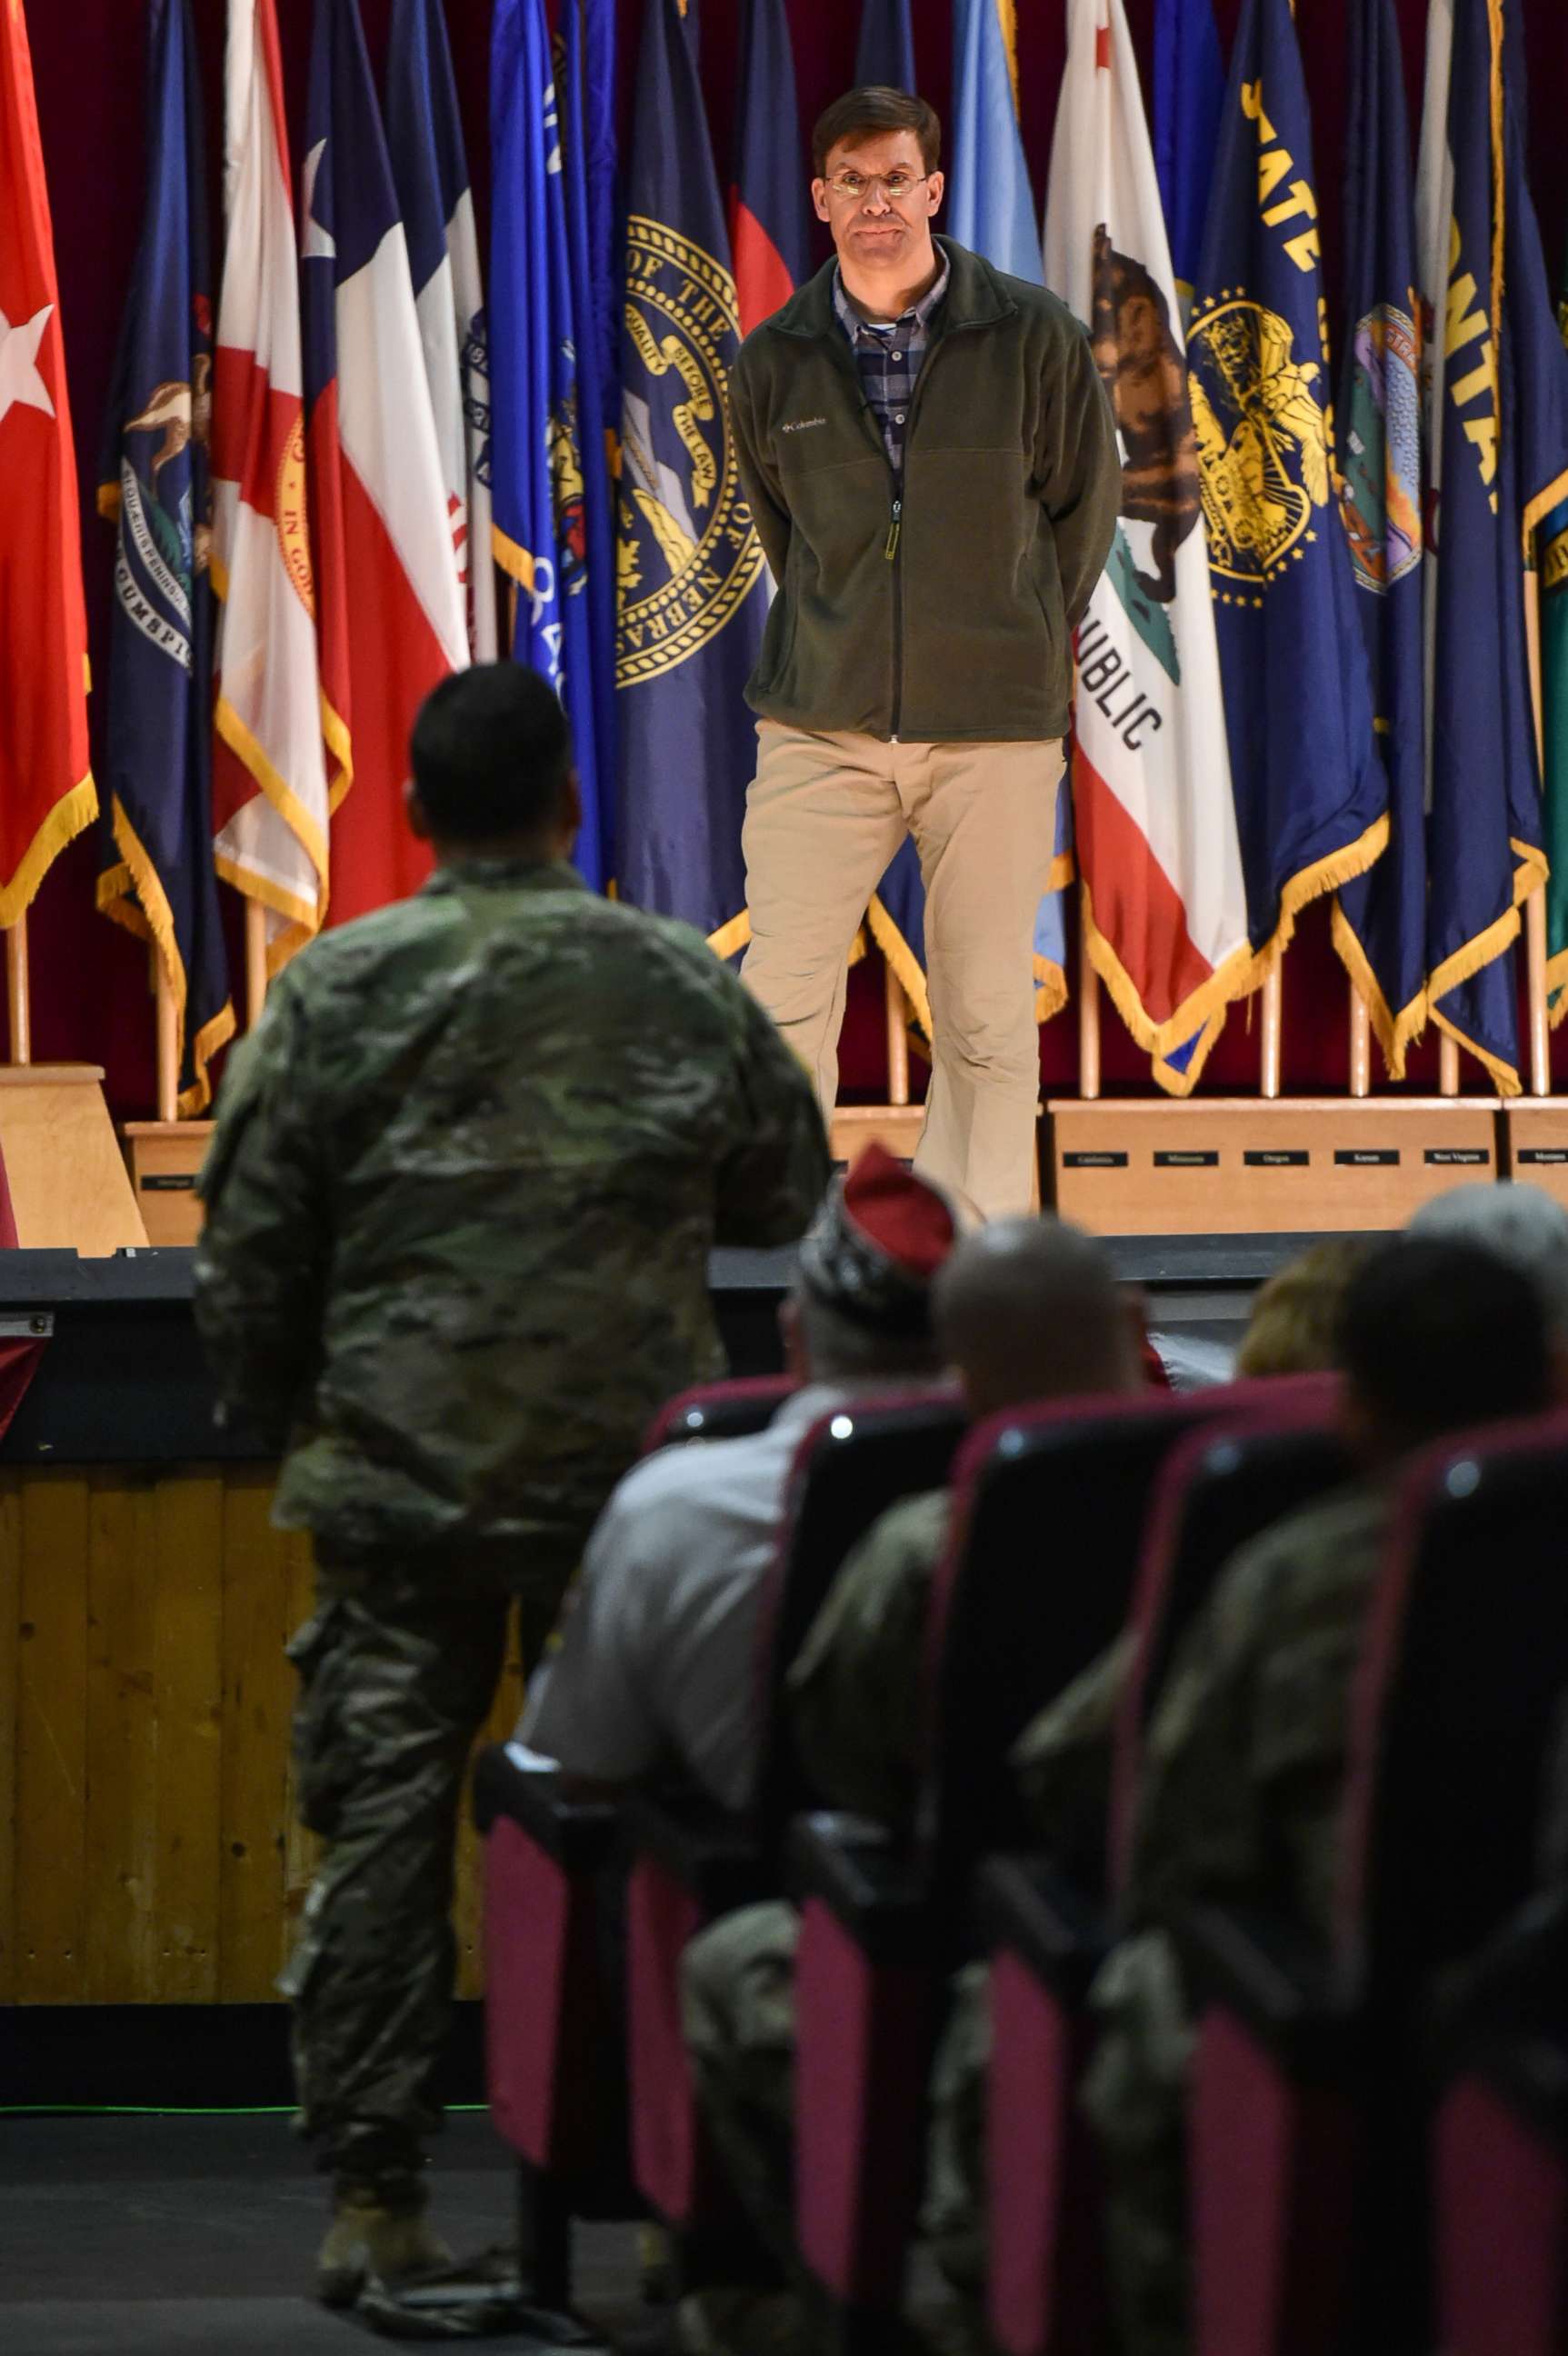 PHOTO: Secretary of the Army Dr. Mark T. Esper listens to a question at a town hall forum during his visit to U.S. Army Garrison Bavaria, the Army's largest overseas garrison, at Tower Barracks, Grafenwoehr, Germany, Jan. 30, 2018.